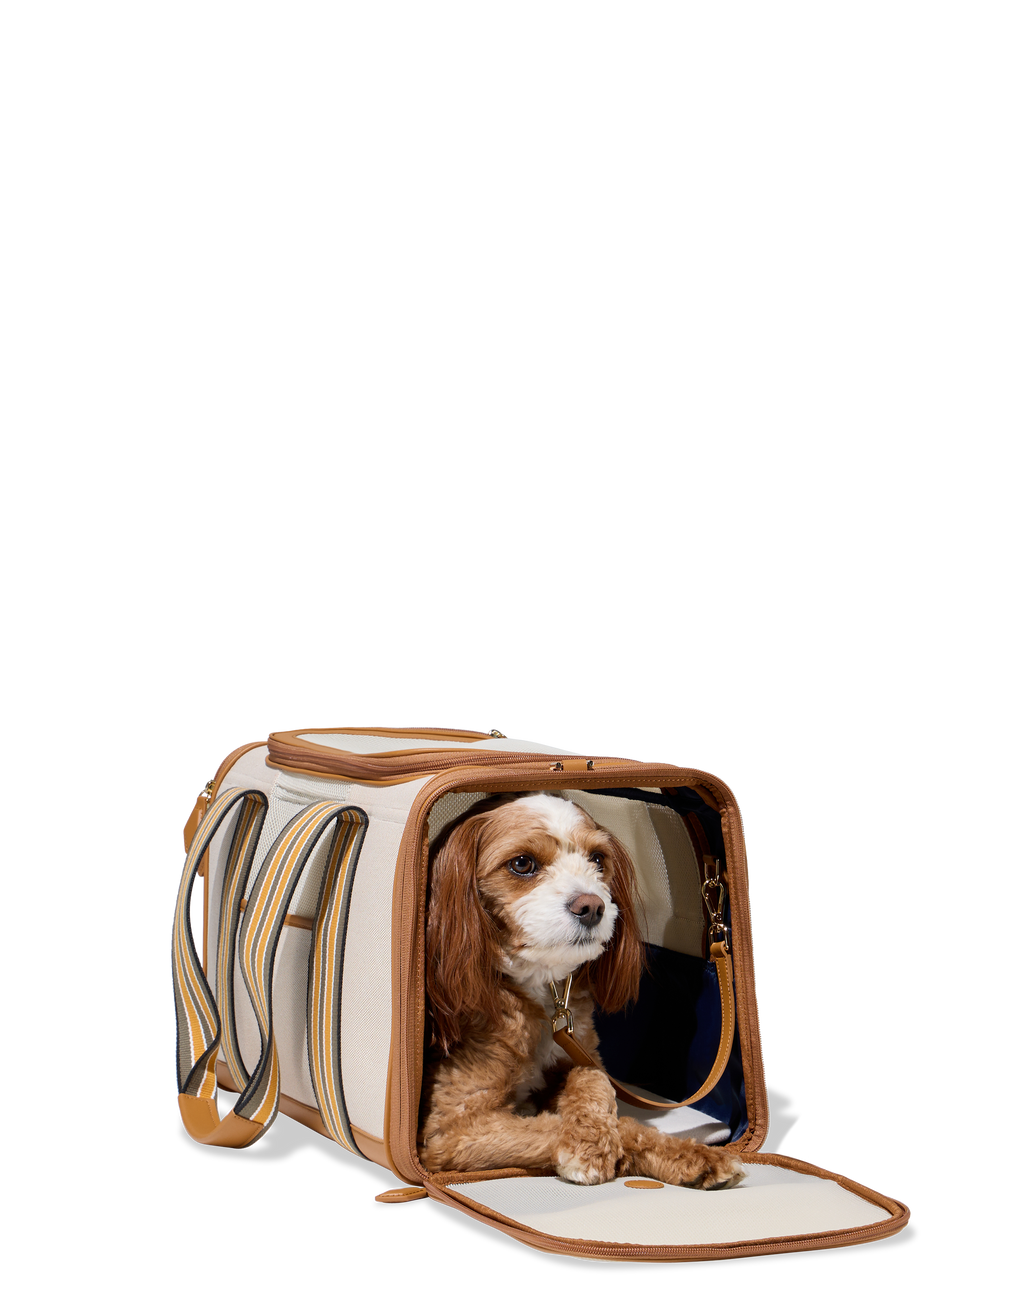 Luxury Pet Travel Tote Bag Dog Carrier with Rabbit Fur Liner